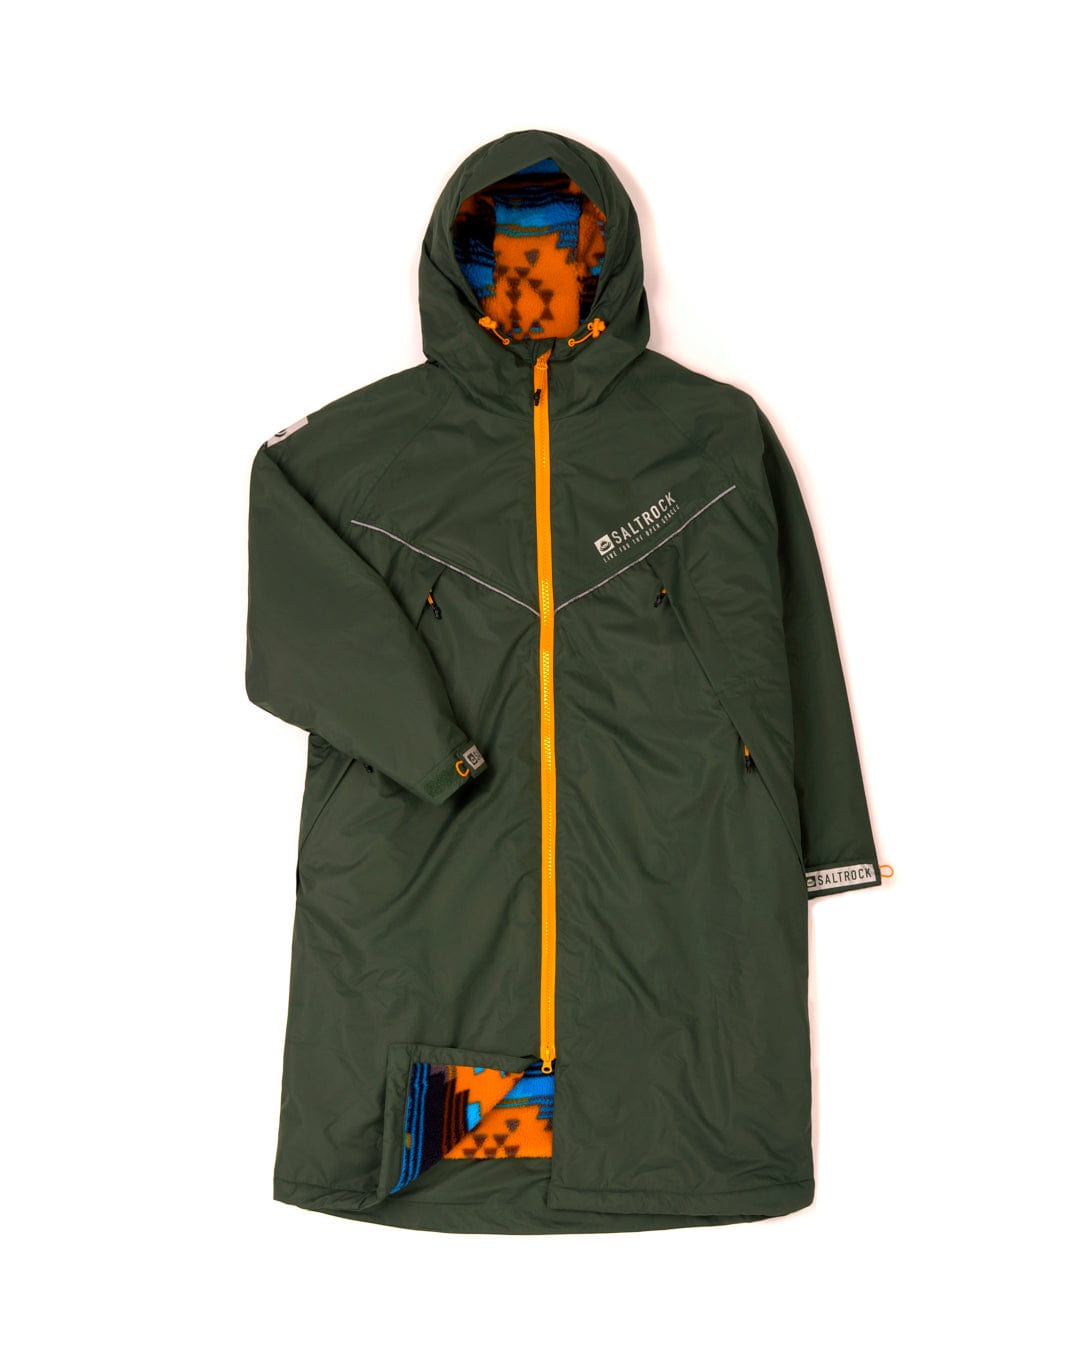 Recycled Saltrock Four Seasons Changing Robe- Olive green with contrasting orange details, brand logo on white background, and fleece lining.